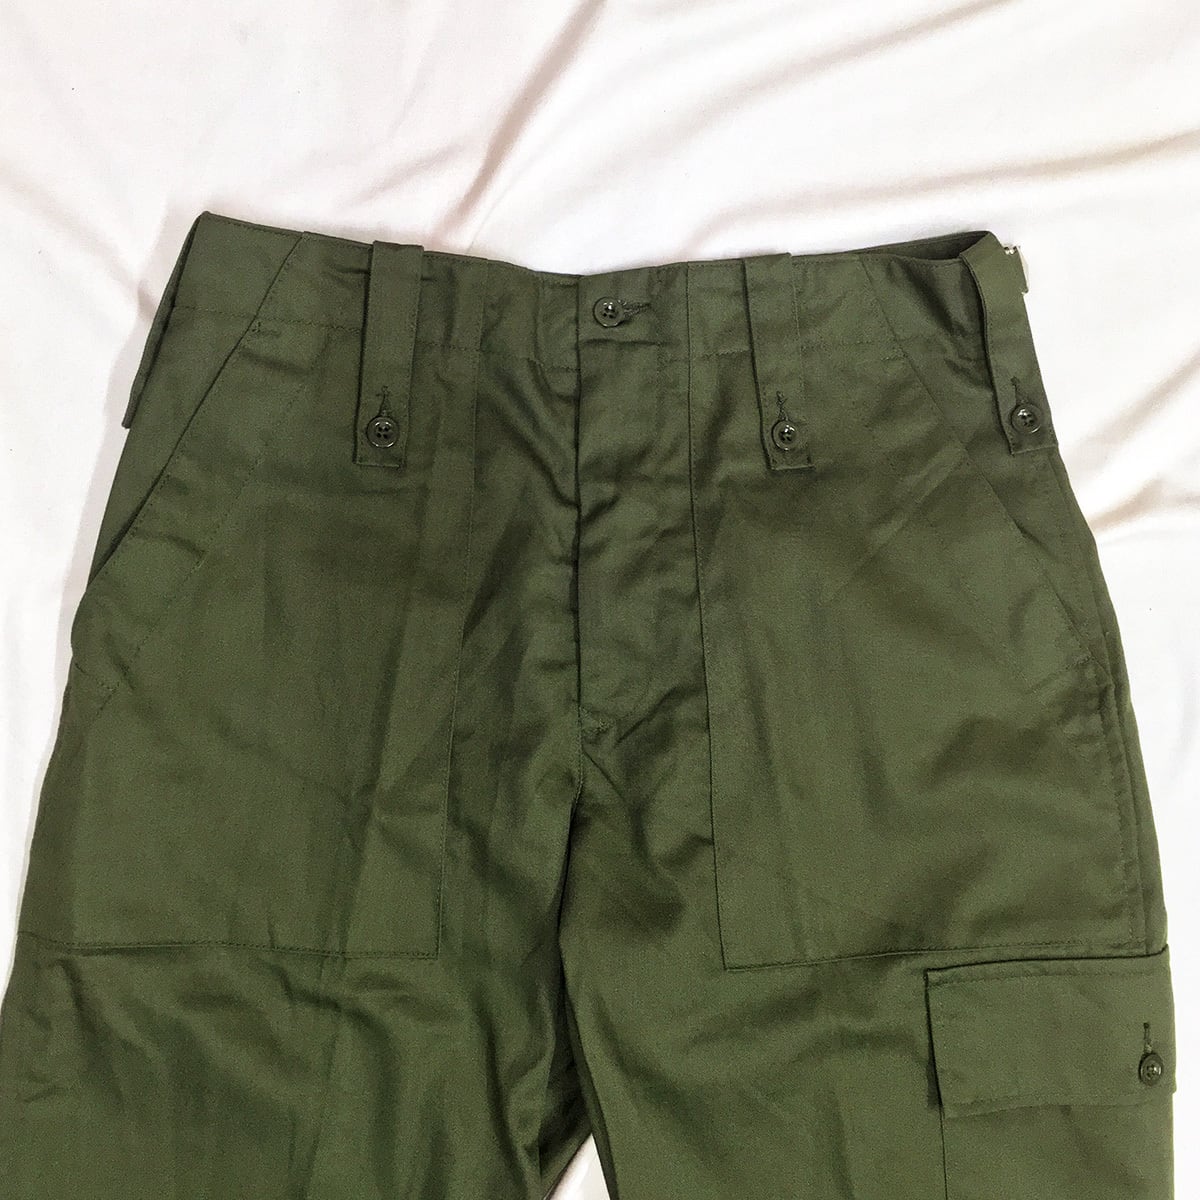 ［DEADSTOCK BRITISH ARMY LIGHT WEIGHT FATIGUE PANTS